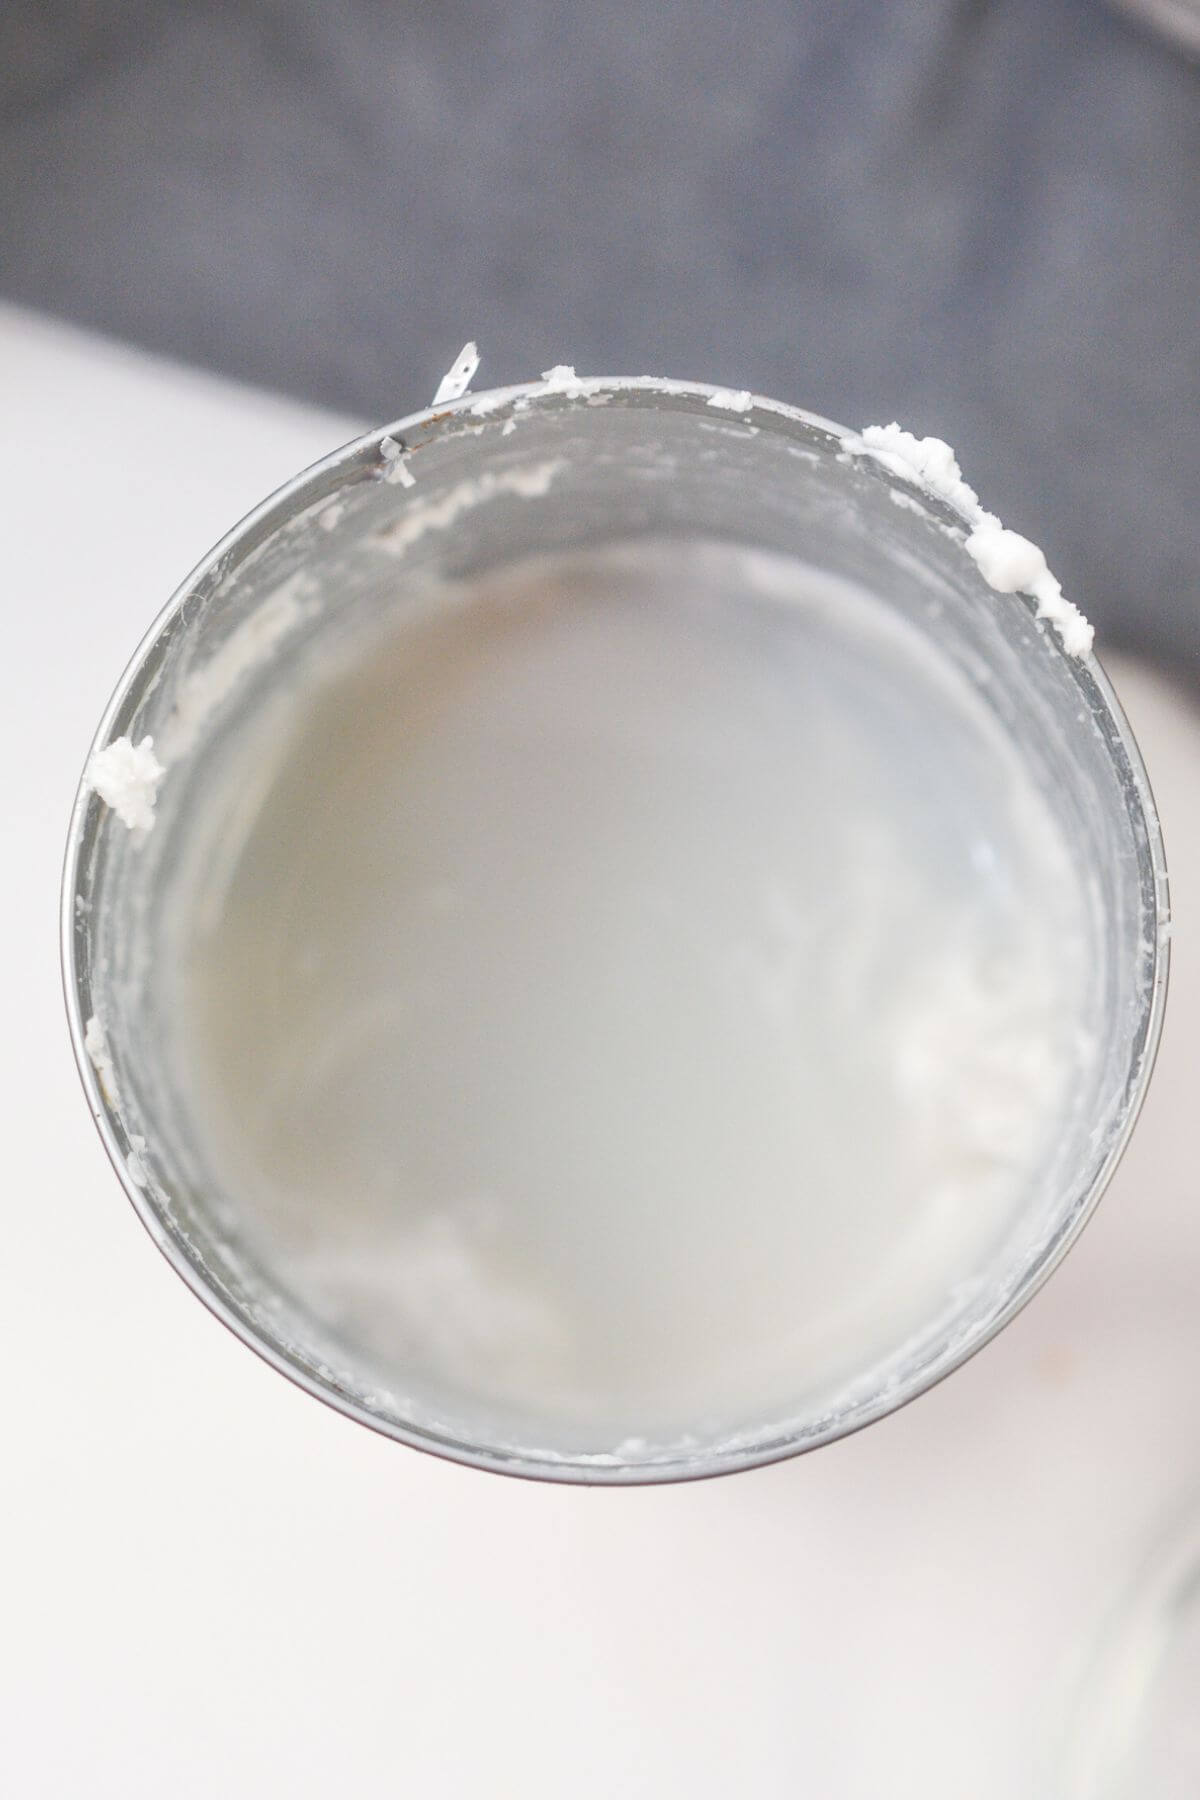 Can of coconut milk with cream removed.